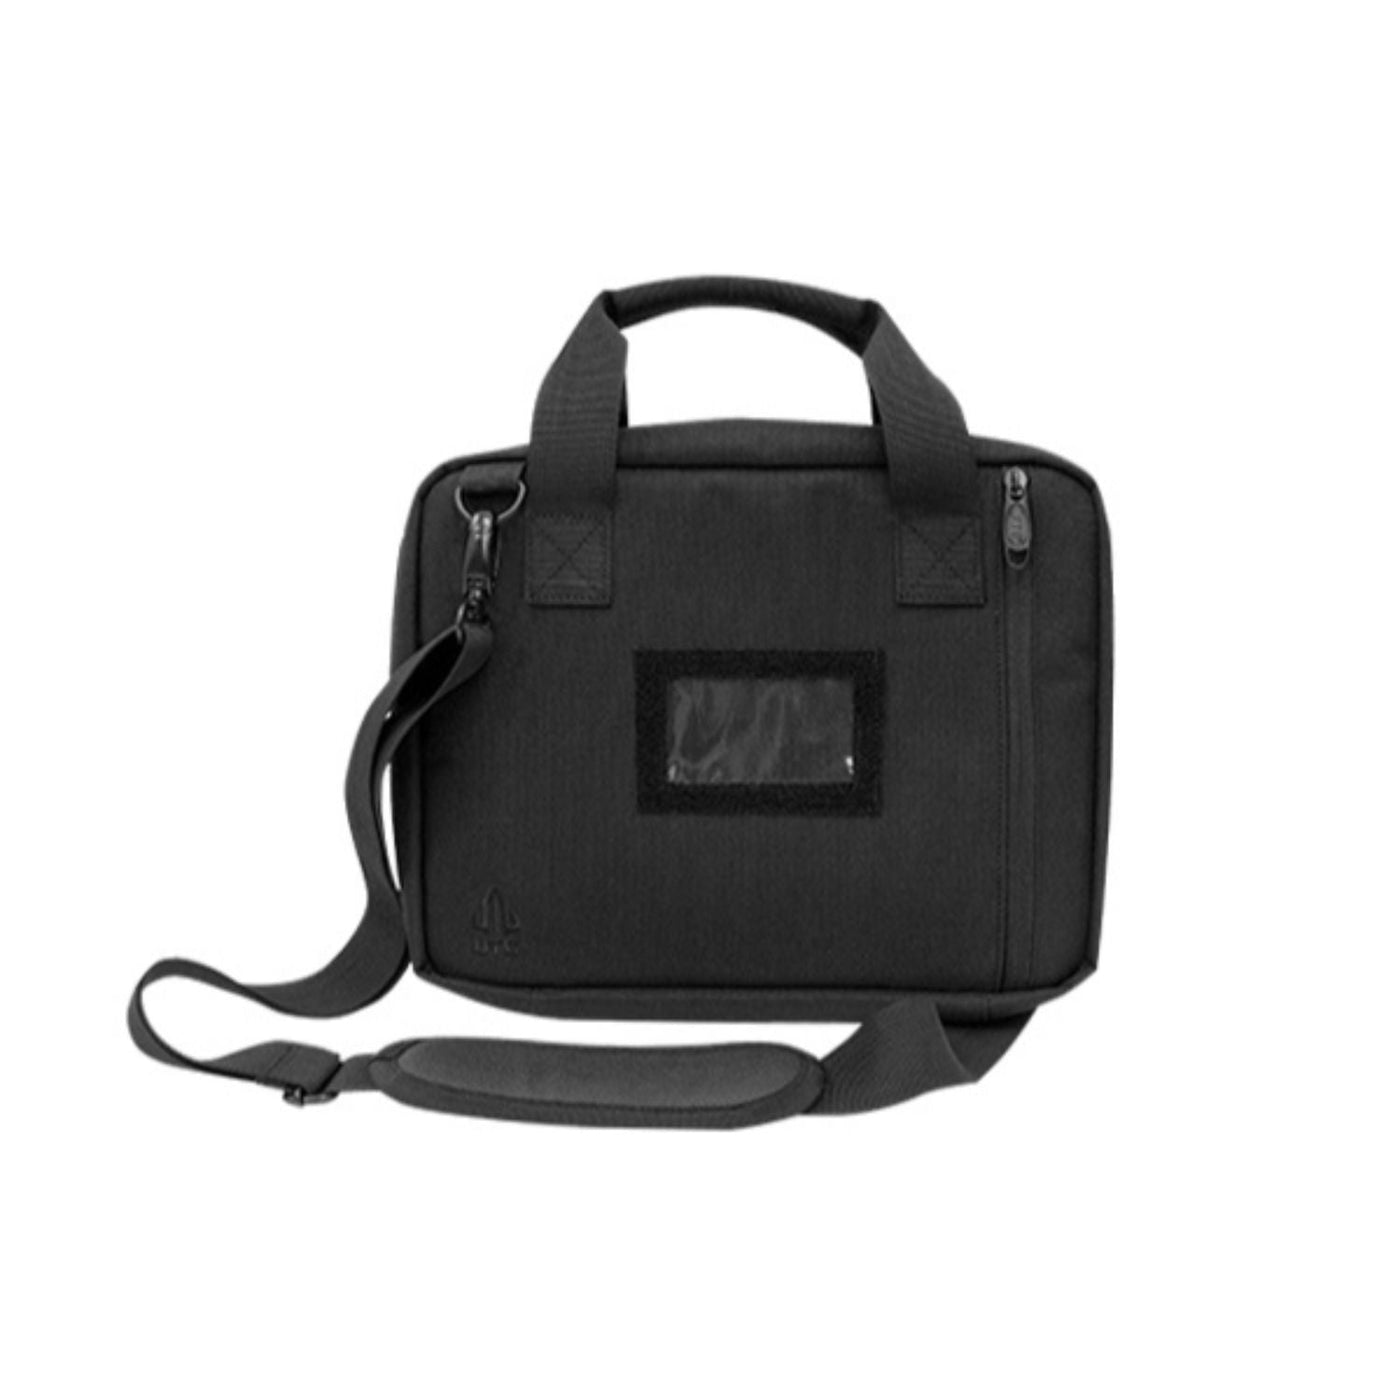 Leapers Leapers UTG Competition Shooter Double Pistol Case-Black Shooting